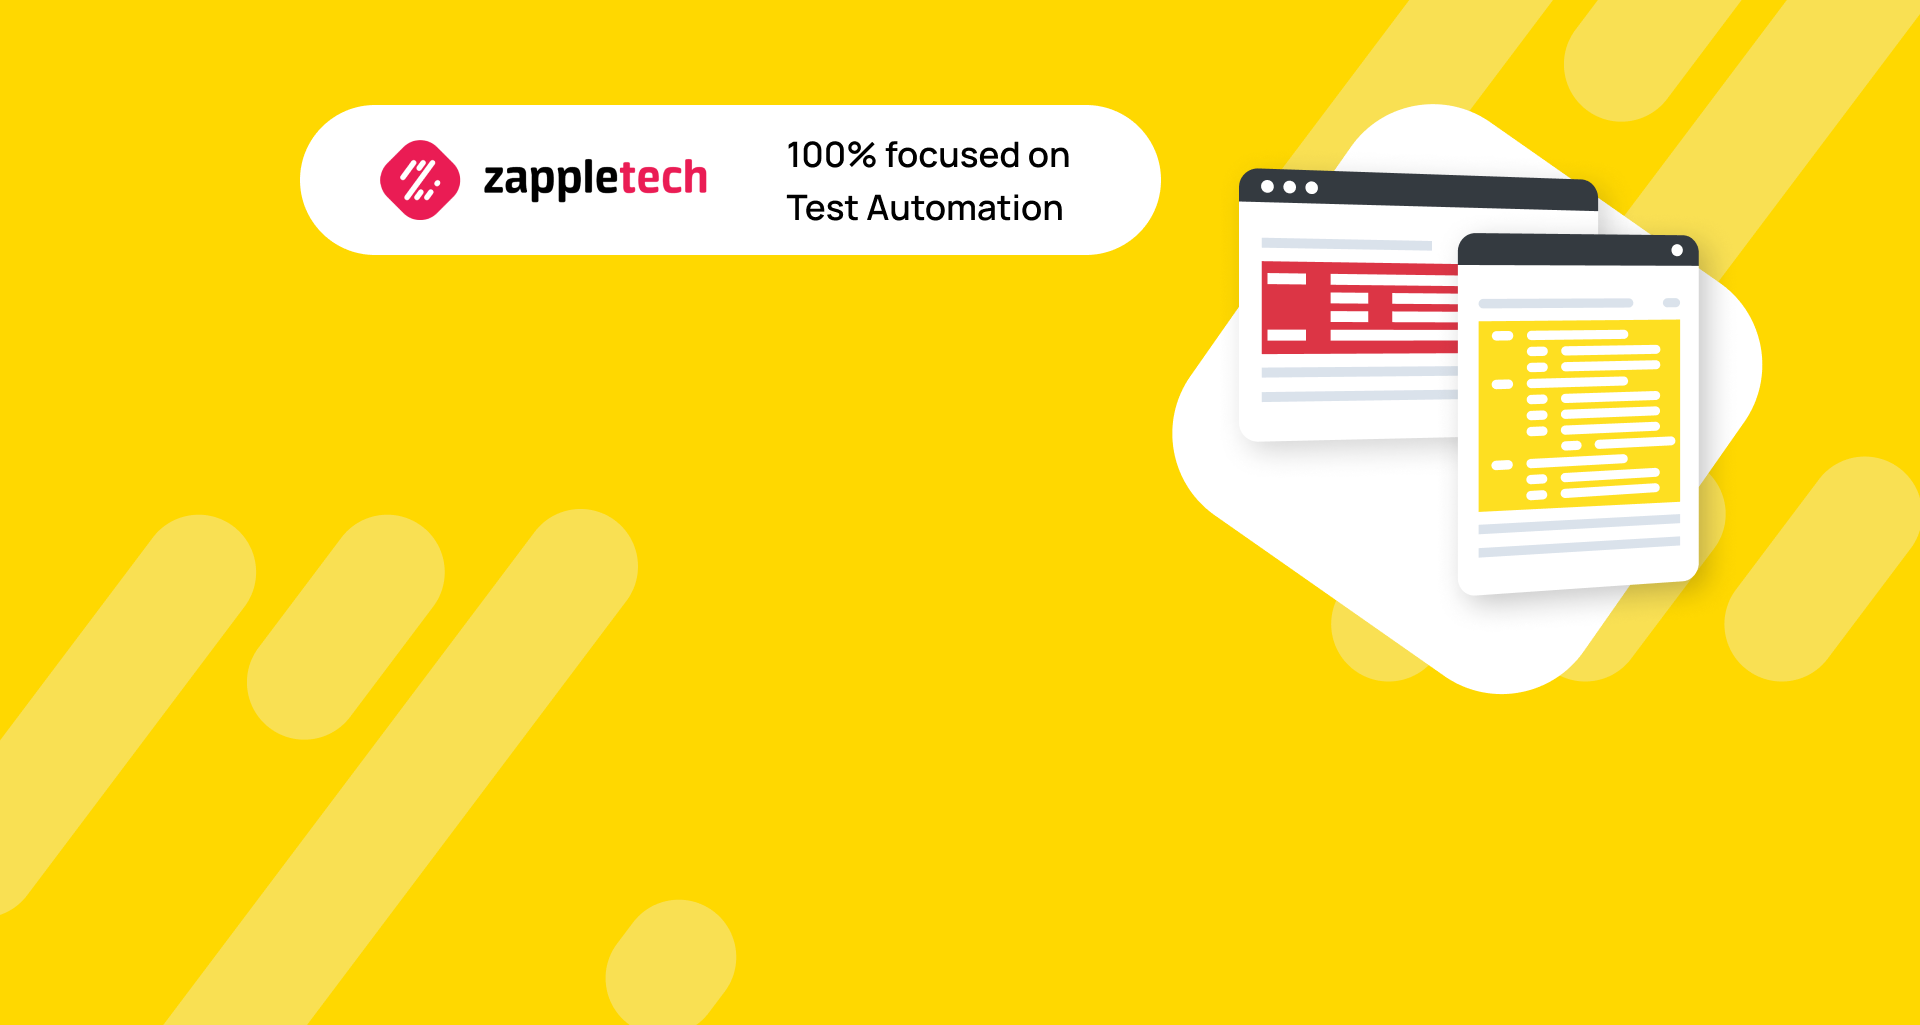 How To Do Automation Testing On An Existing Web Application